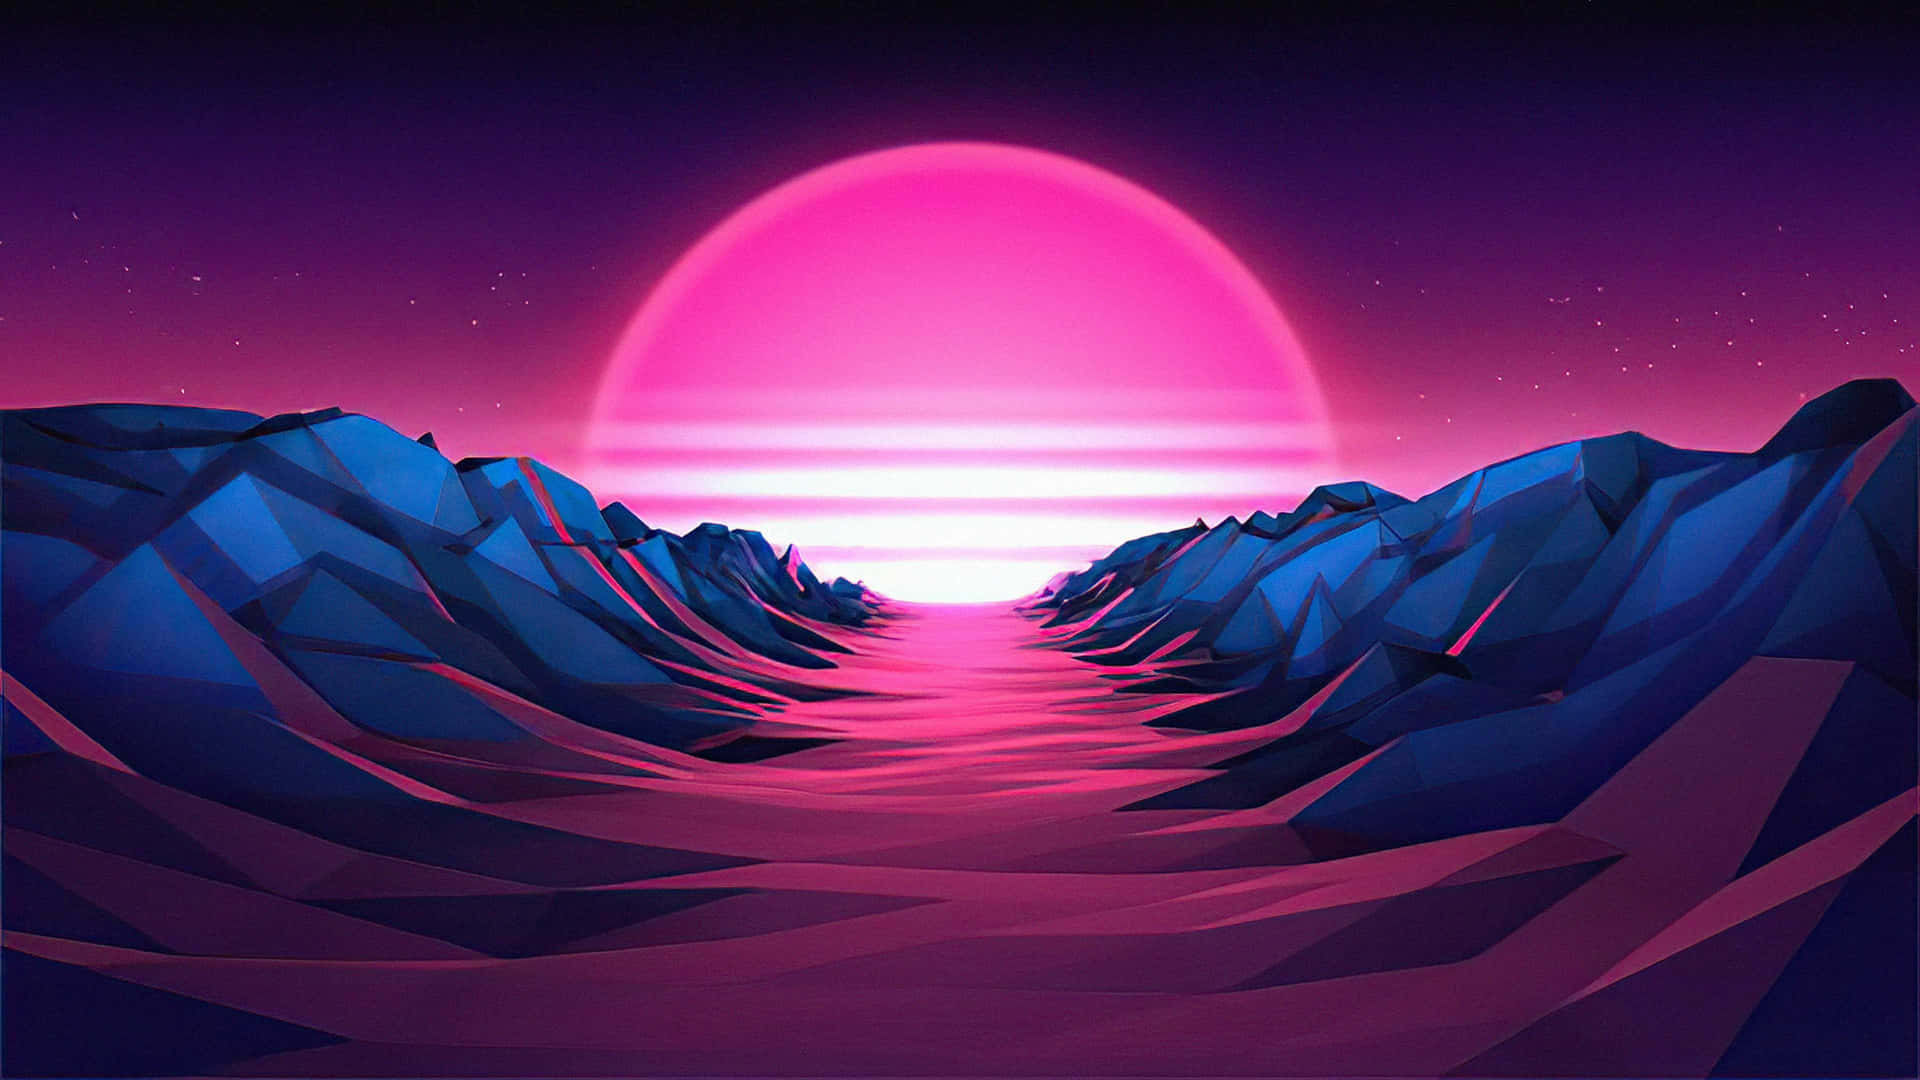 a pink and purple sphere in the middle of a mountain